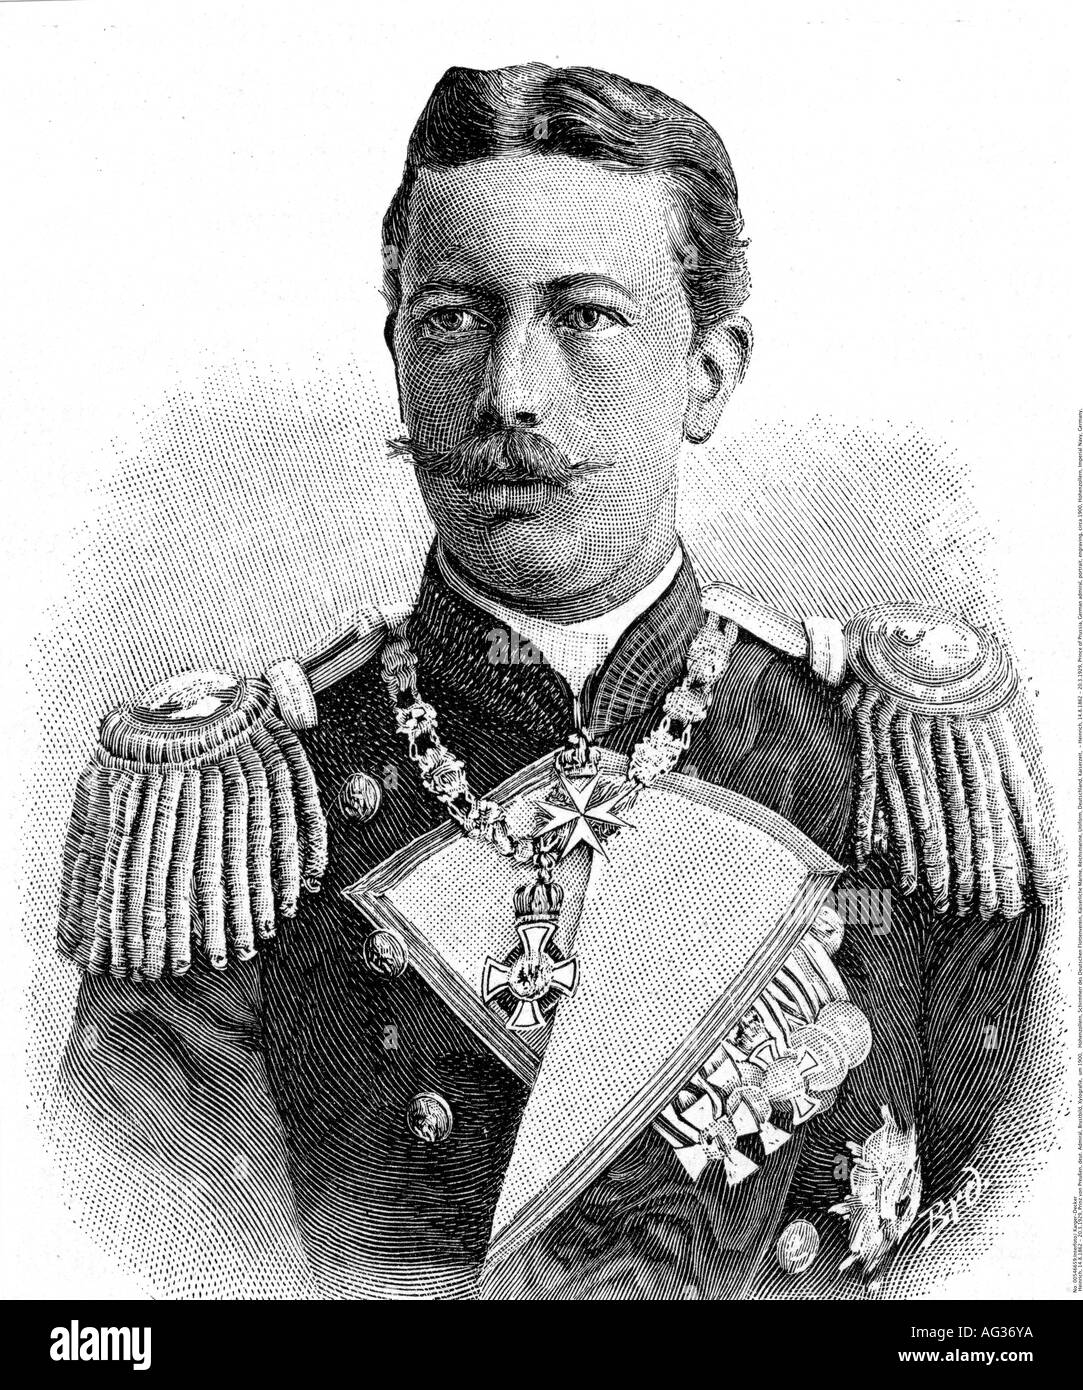 Heinrich, 14.8.1862 - 20.3.1929, Prince of Prussia, German admiral, portrait, engraving, circa 1900, Hohenzollern, Imperial Navy, Germany, Henry, , Stock Photo